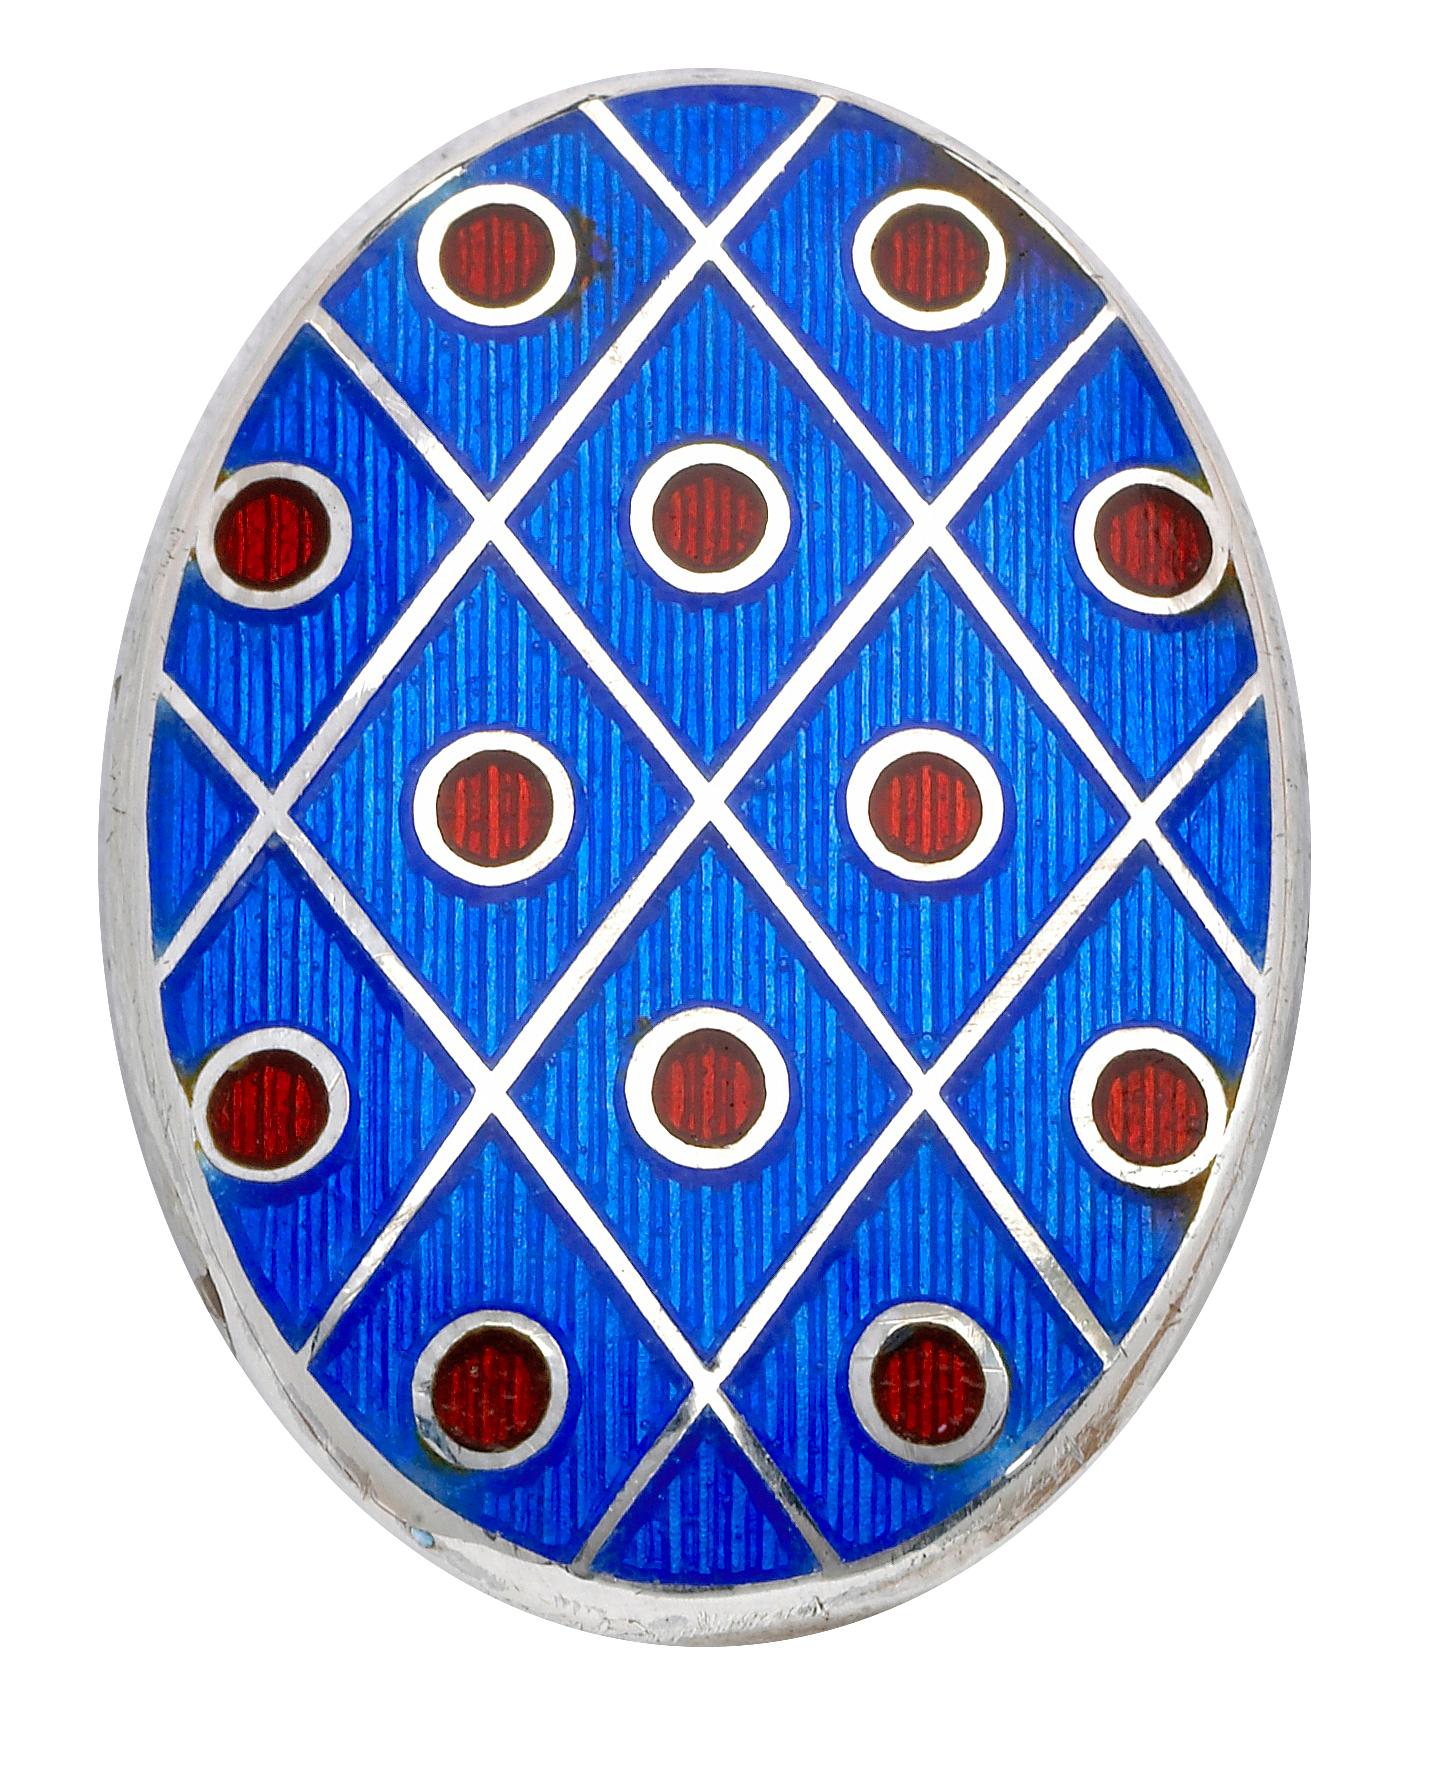 DEAKIN & FRANCIS, Piccadilly Arcade, London

Here at Deakin & Francis we are masters in the art of vitreous enamelling, dating back to the Pharaohs, this is a highly specialised, hand skill. These sterling silver, oval cufflinks feature a unique,